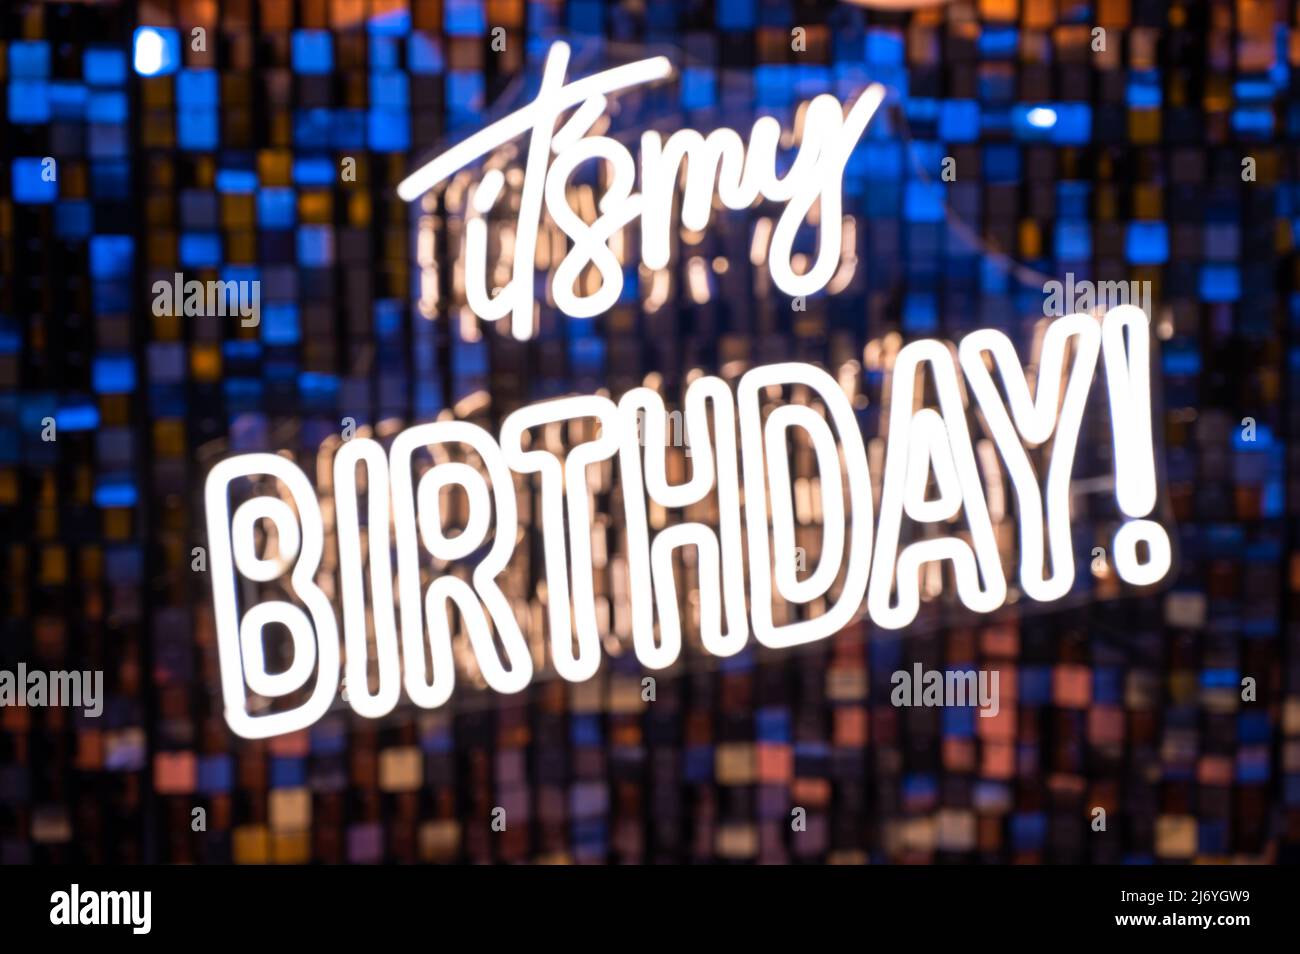 It's my birthday party background with text and colorful tools ...